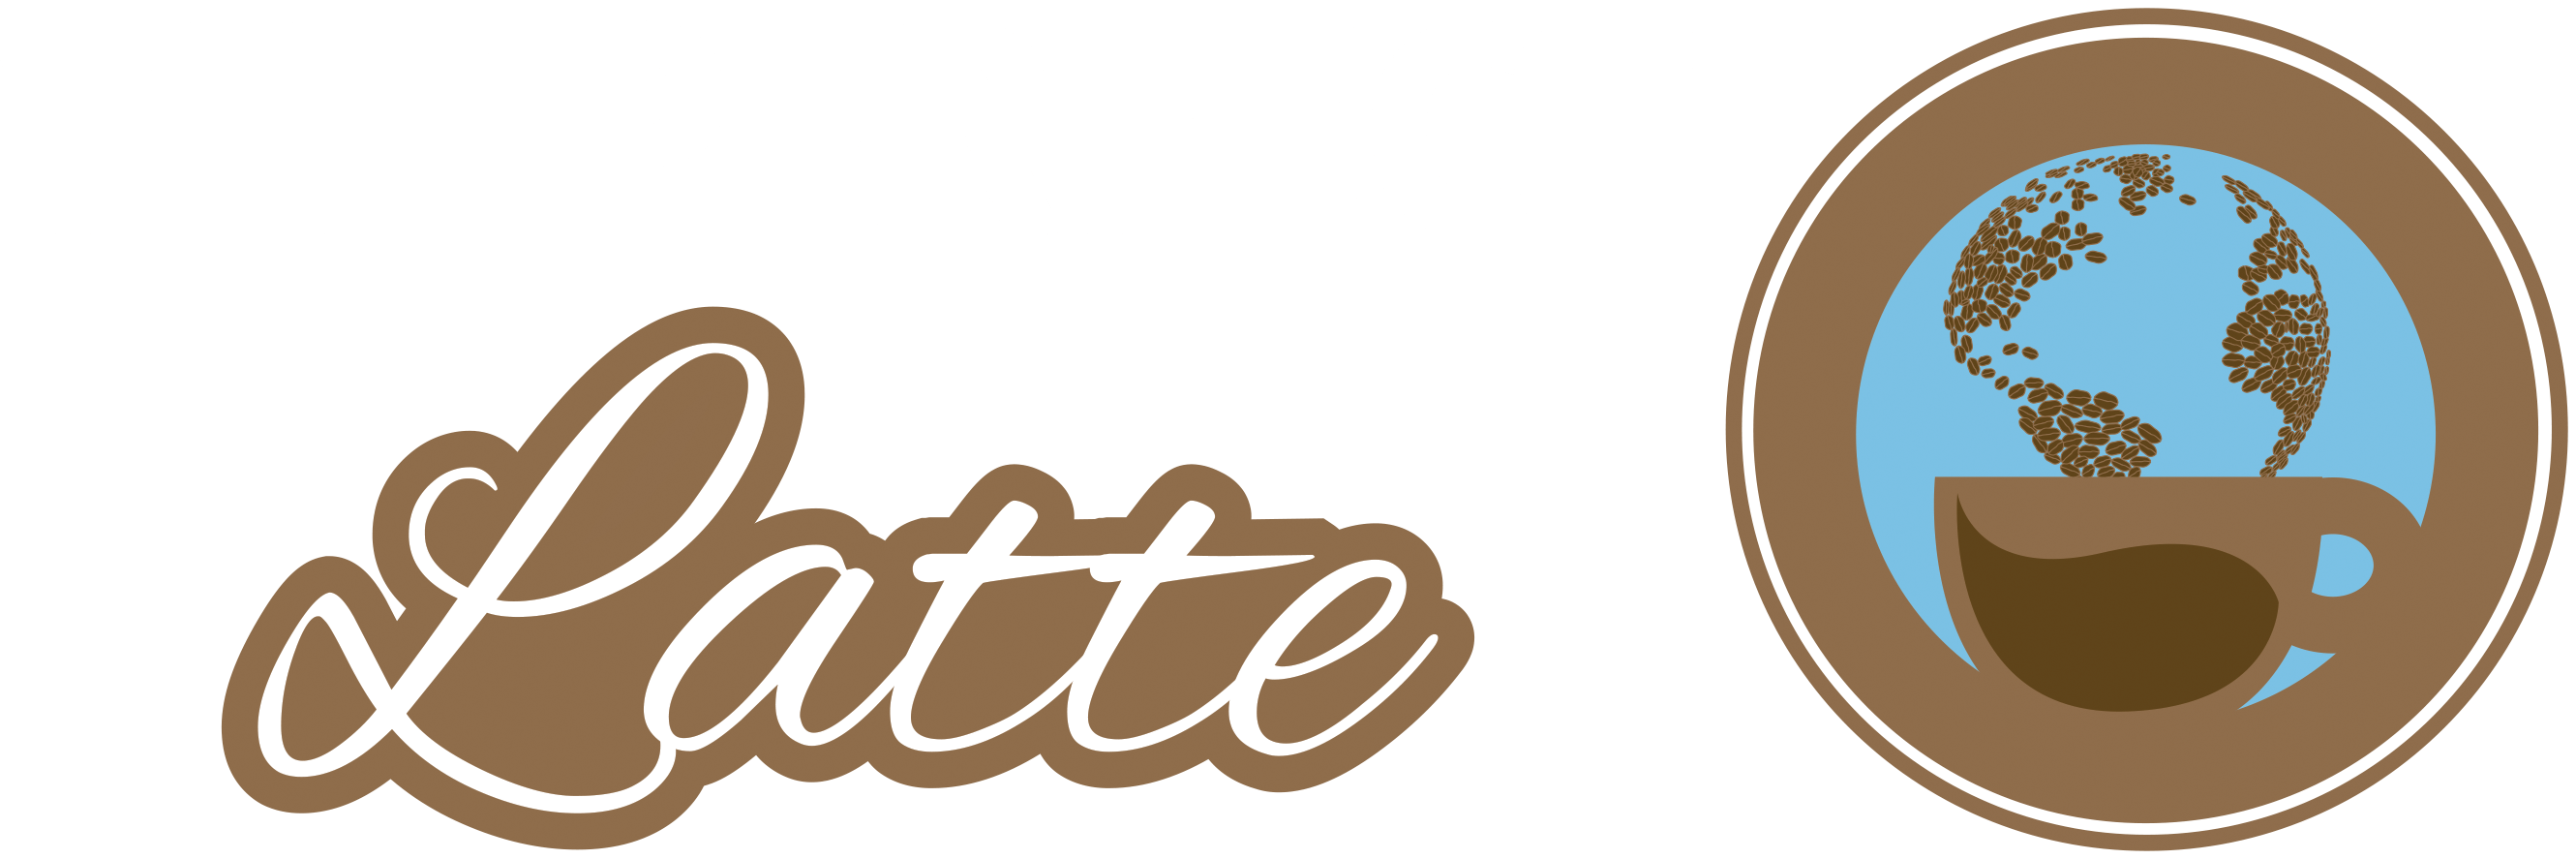 Latte Logo - The Perfect Latte - Challenge your taste buds - Our Menu